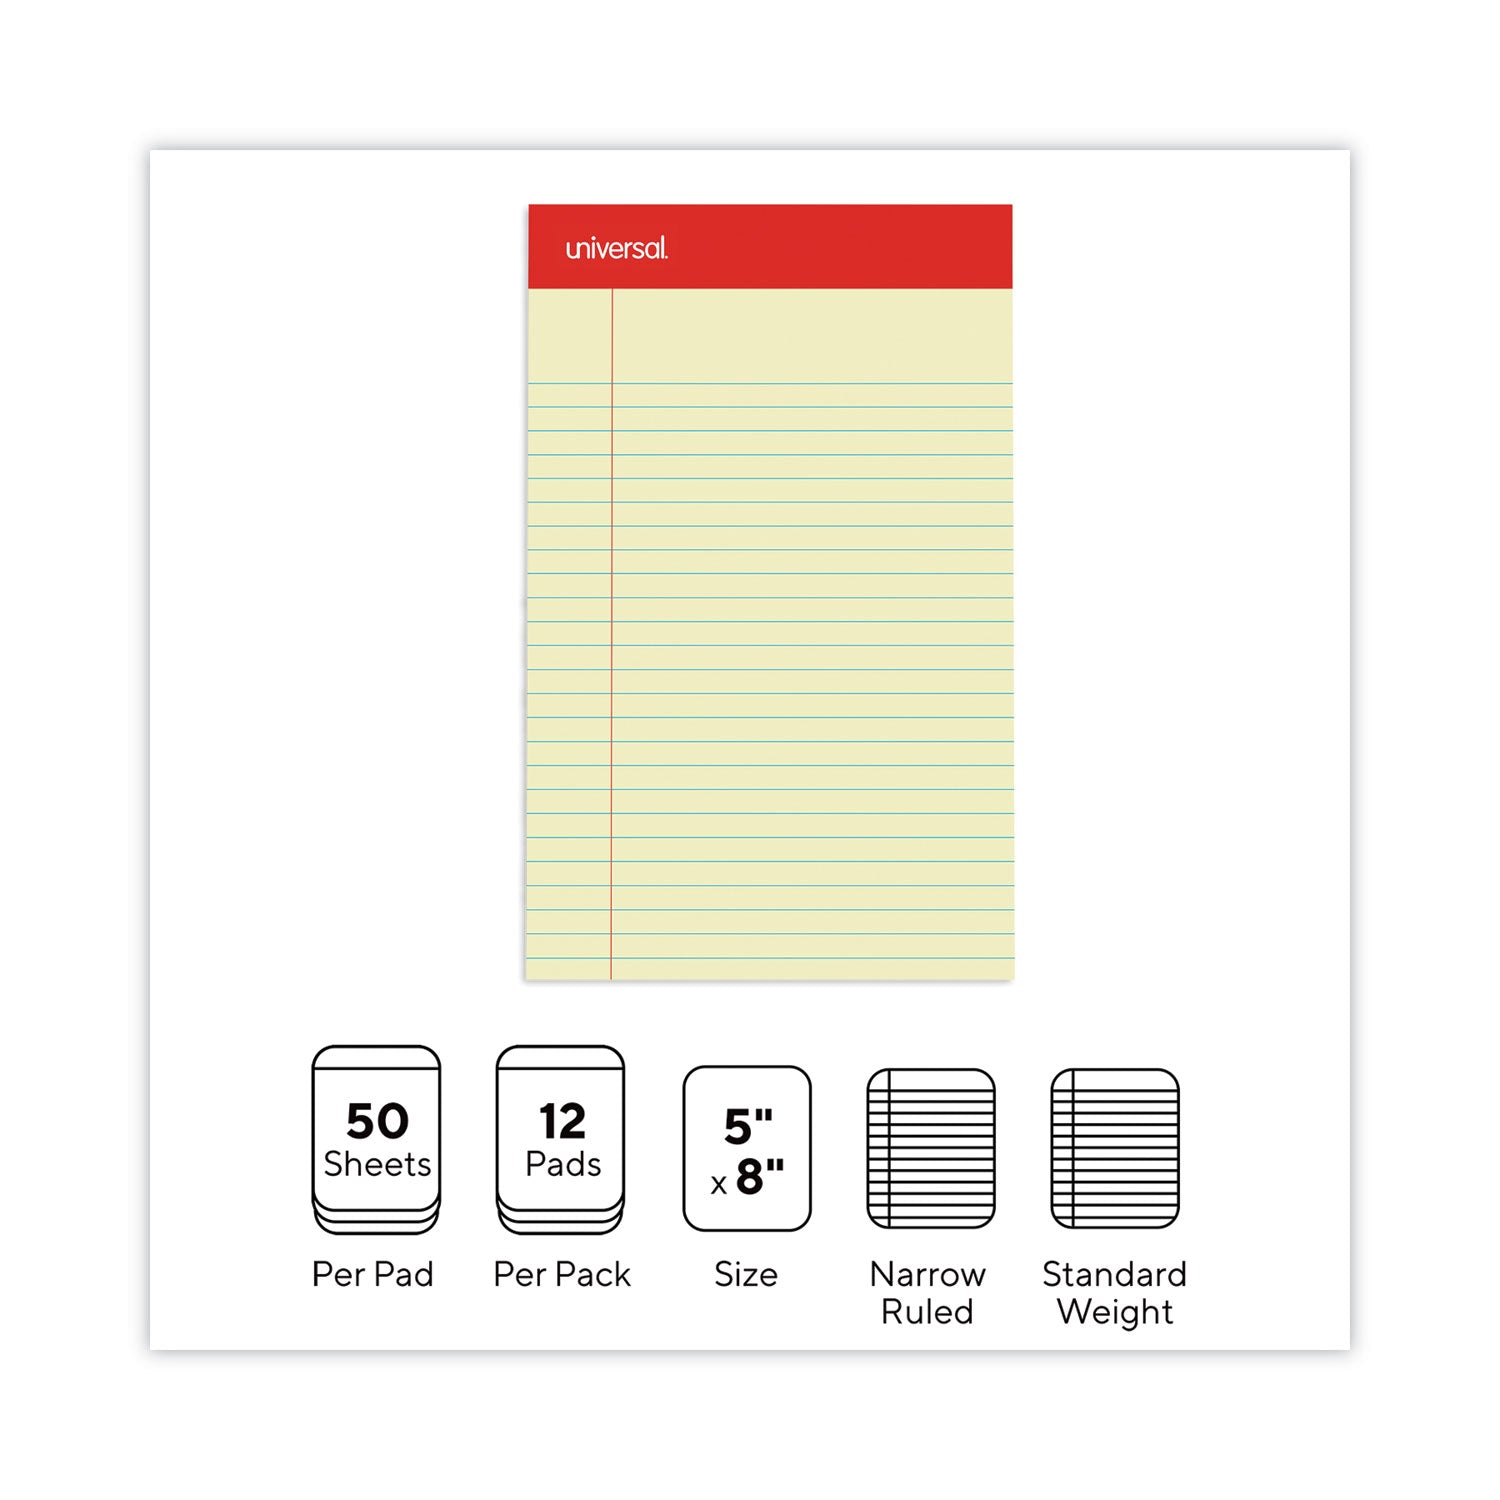 Perforated Ruled Writing Pads, Narrow Rule, Red Headband, 50 Canary-Yellow 5 x 8 Sheets, Dozen - 